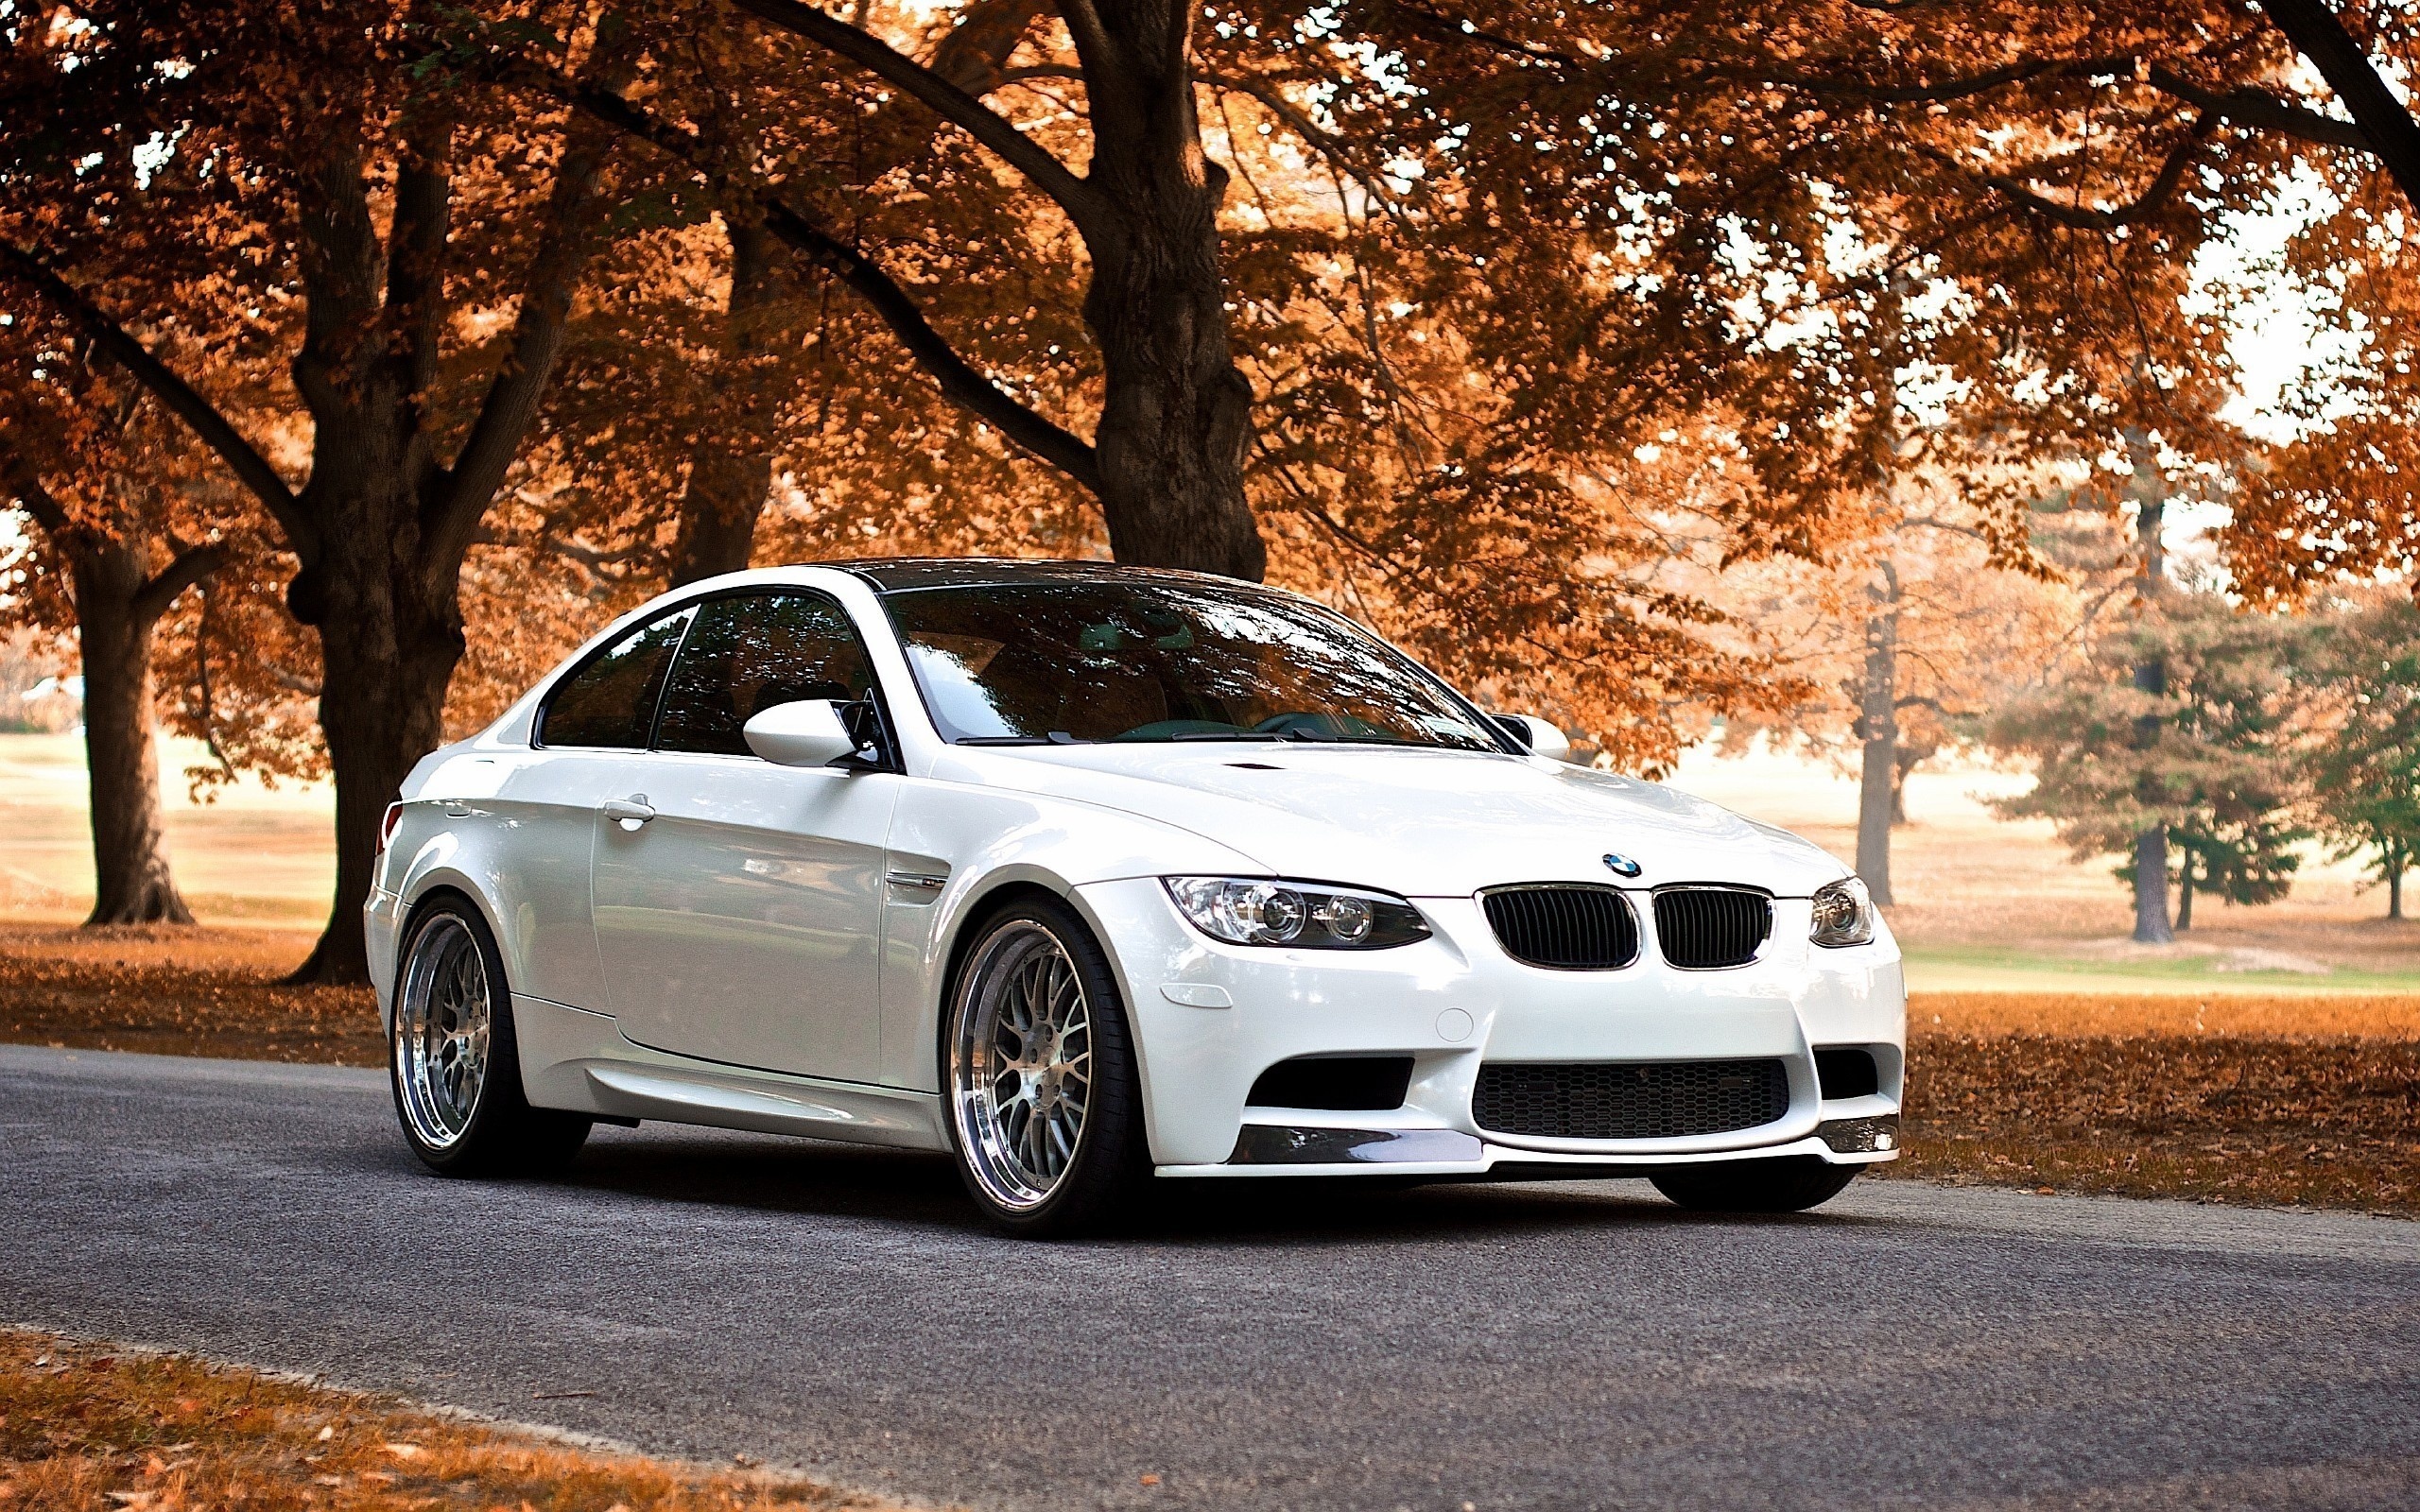 BMW M3, HD wallpapers and backgrounds, Captivating visuals, Automotive excellence, 2560x1600 HD Desktop